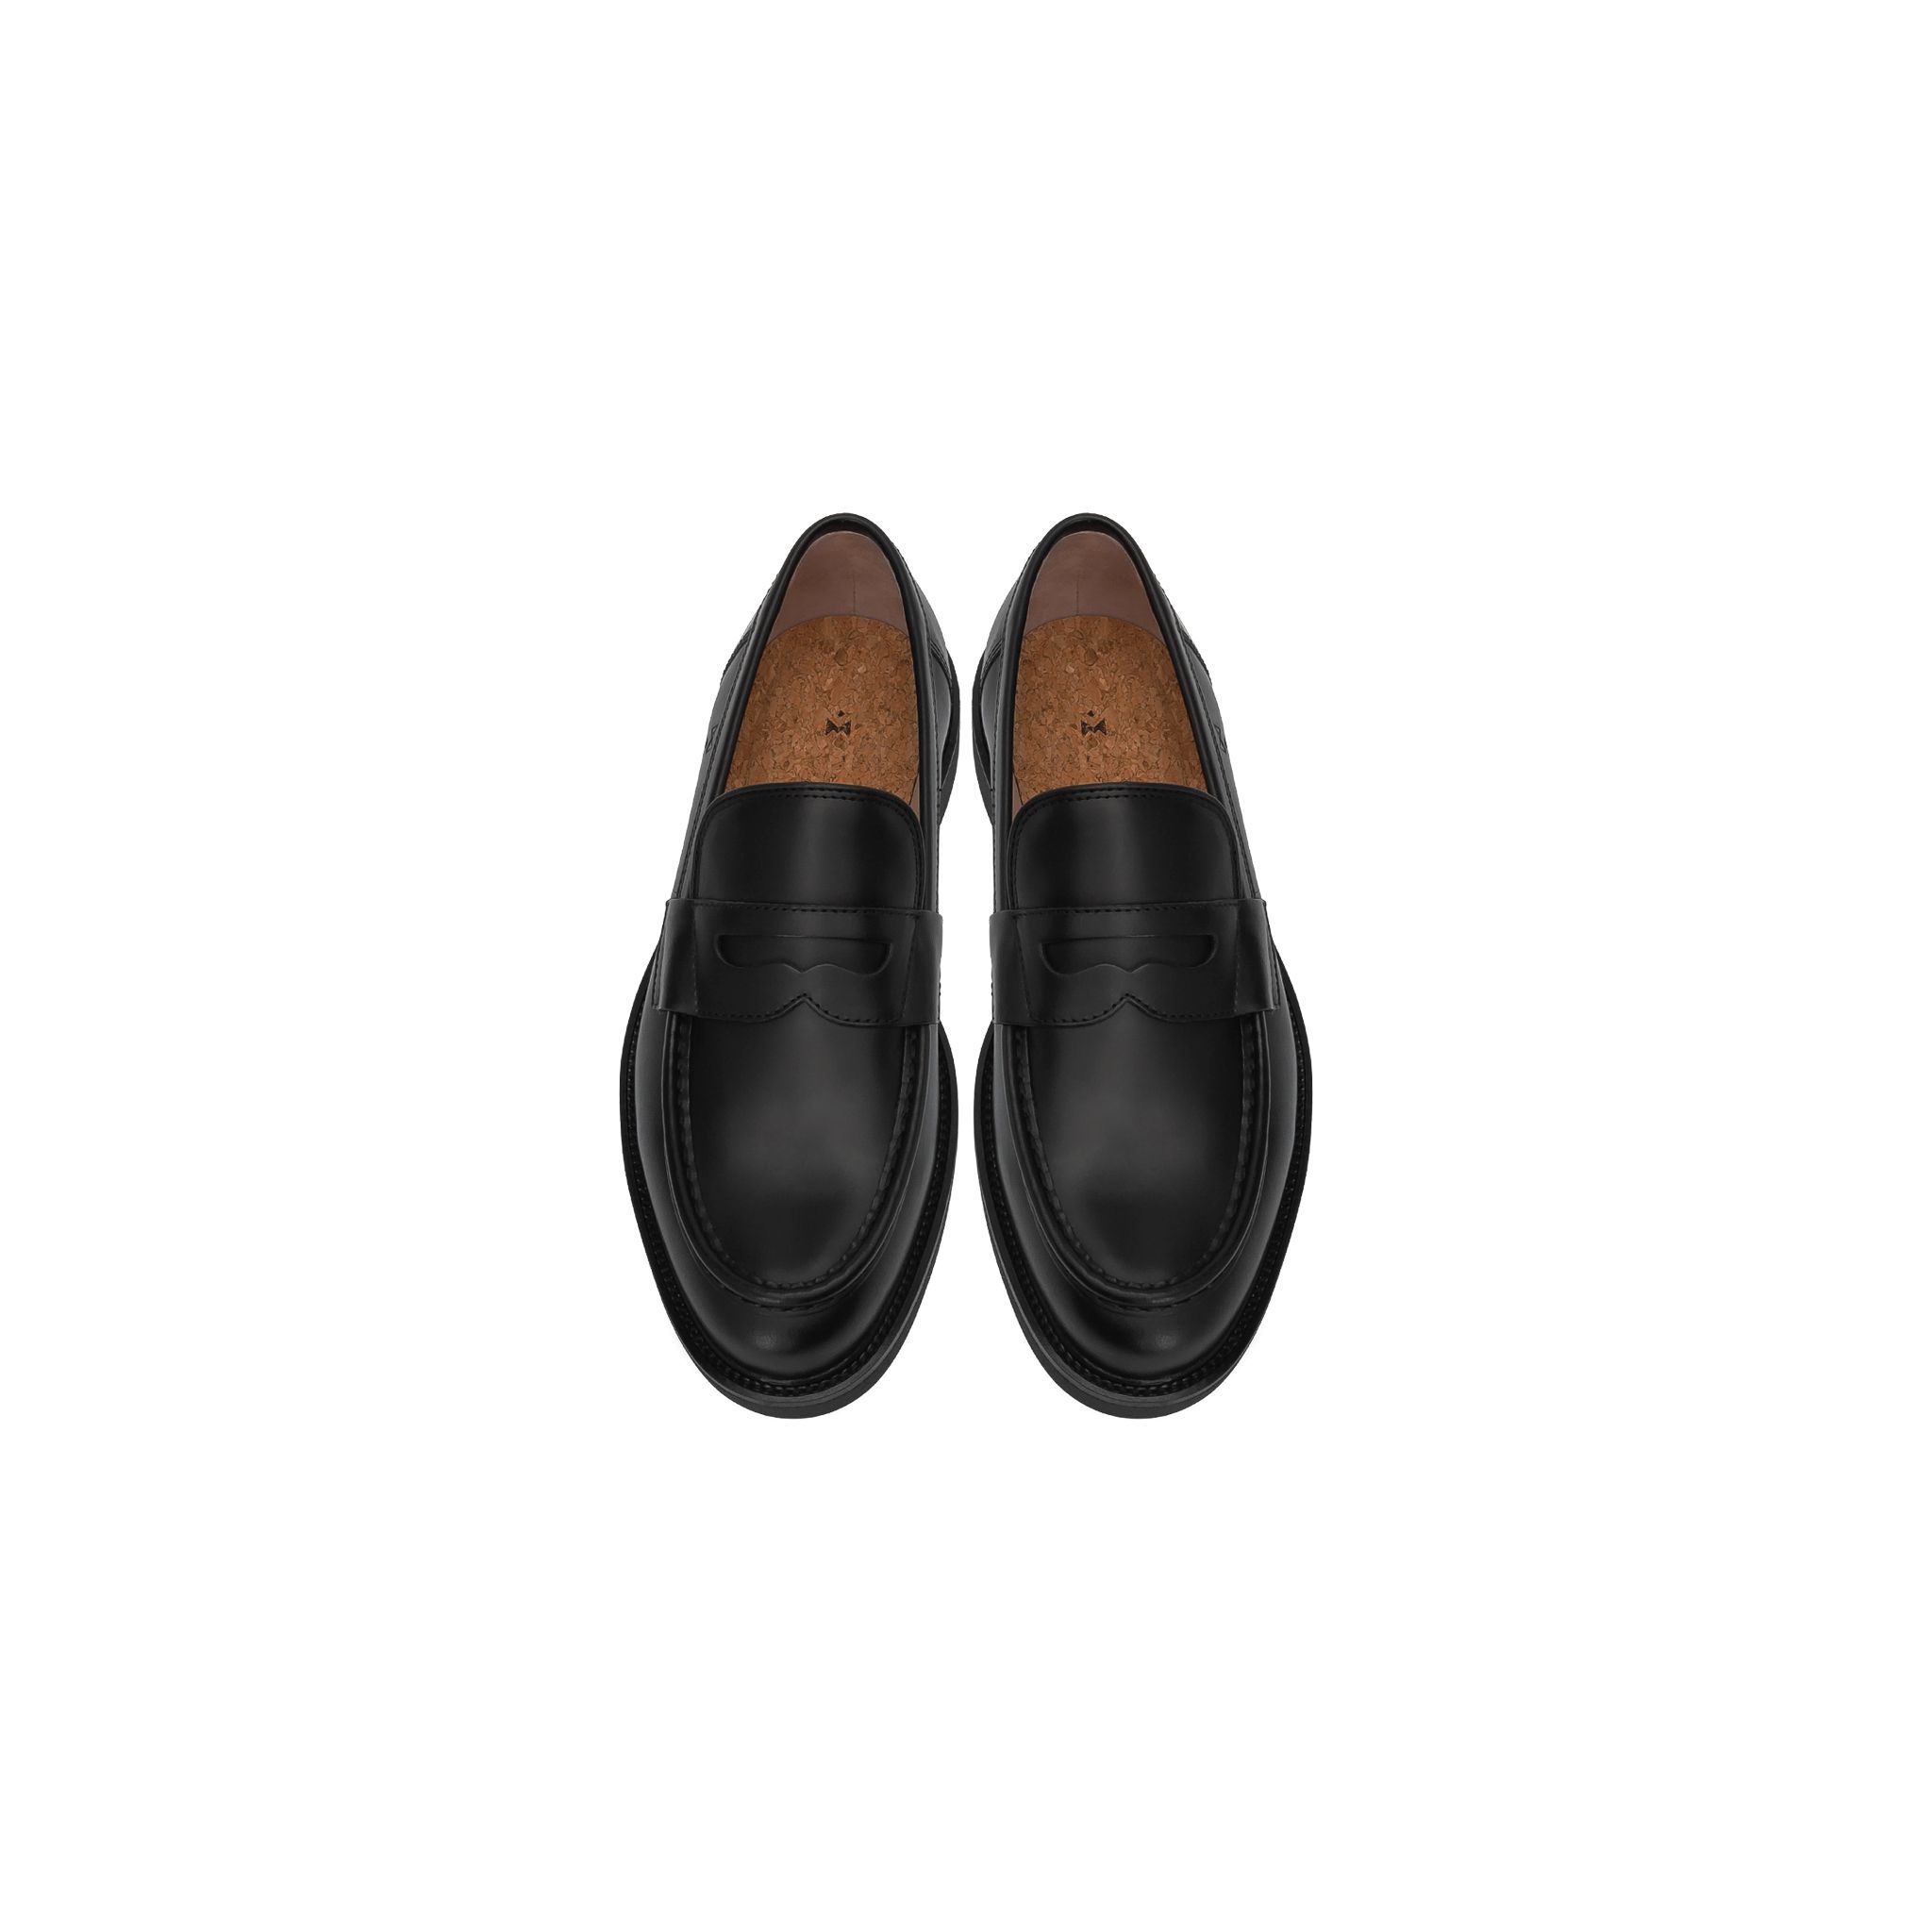  THE SEAN WOLF PENNY LOAFER - BLACK 